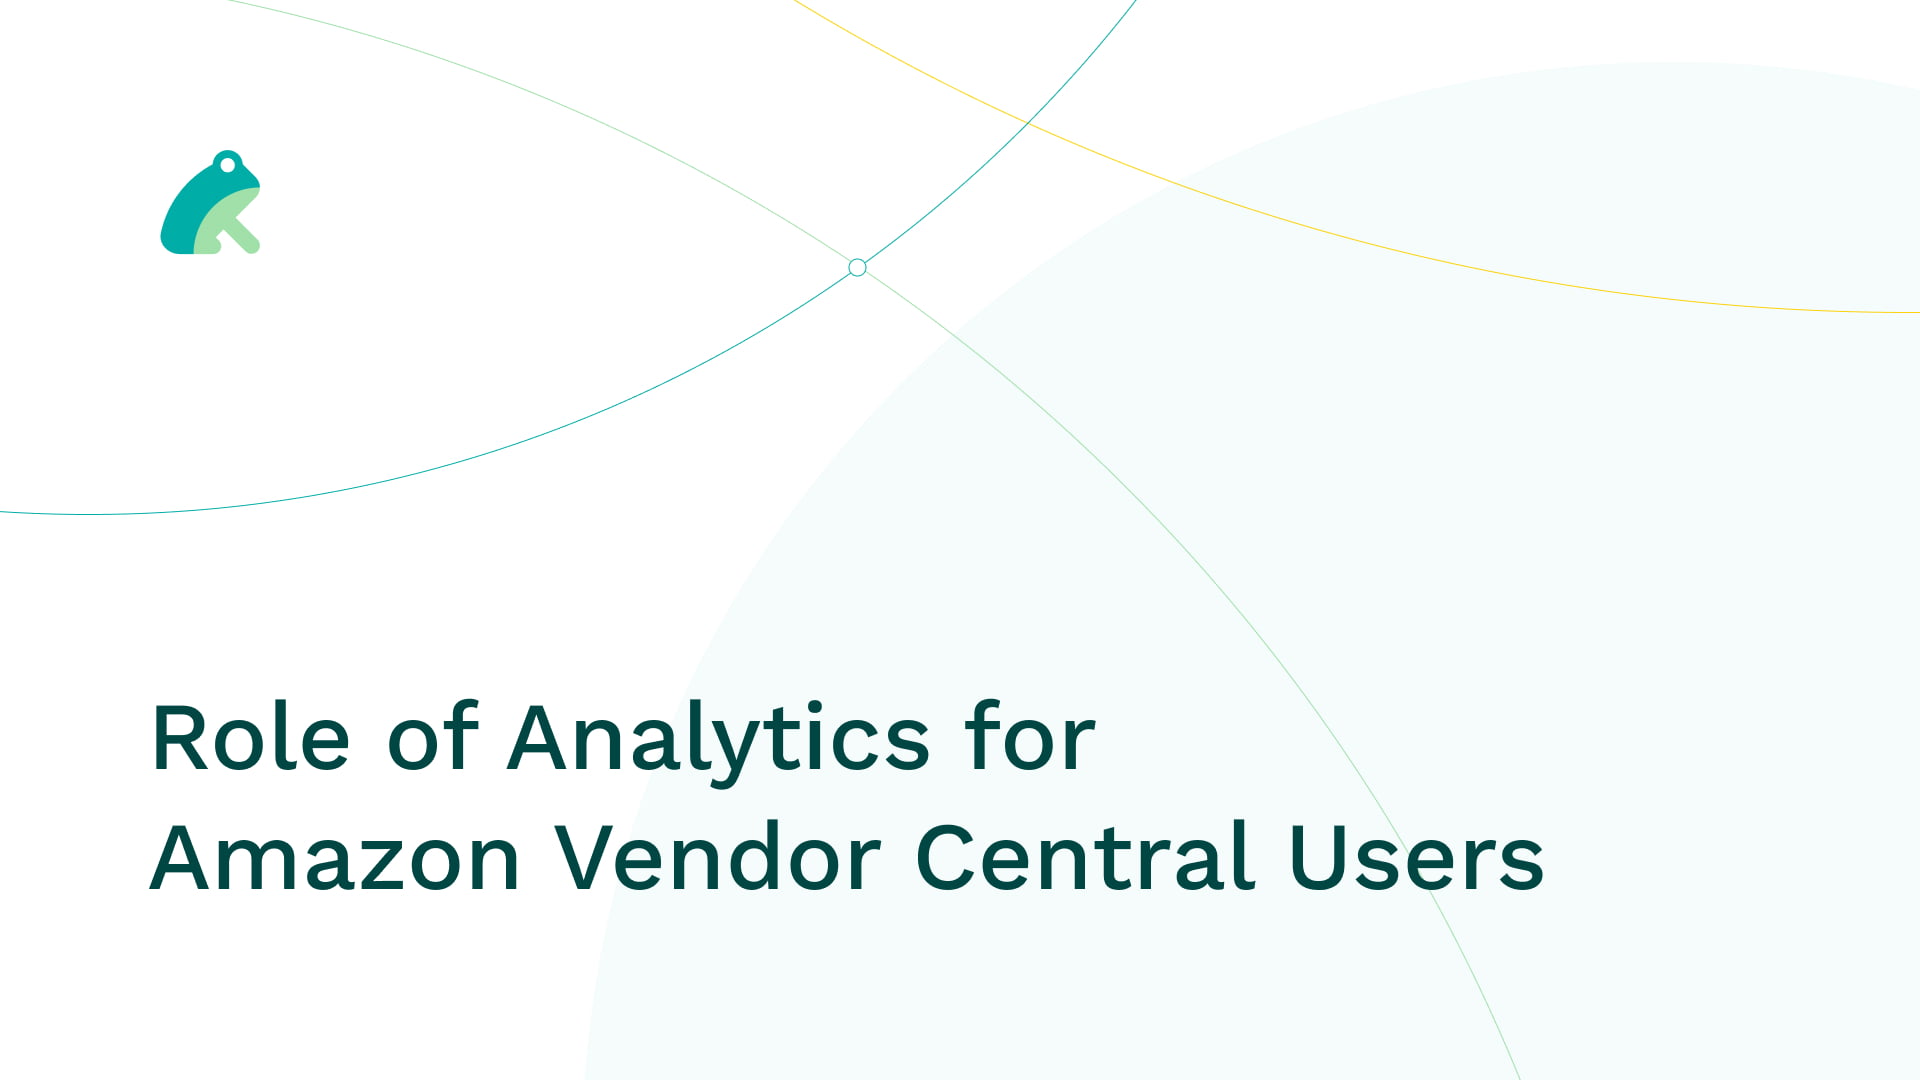 Role of Analytics for Amazon Vendor Central Users